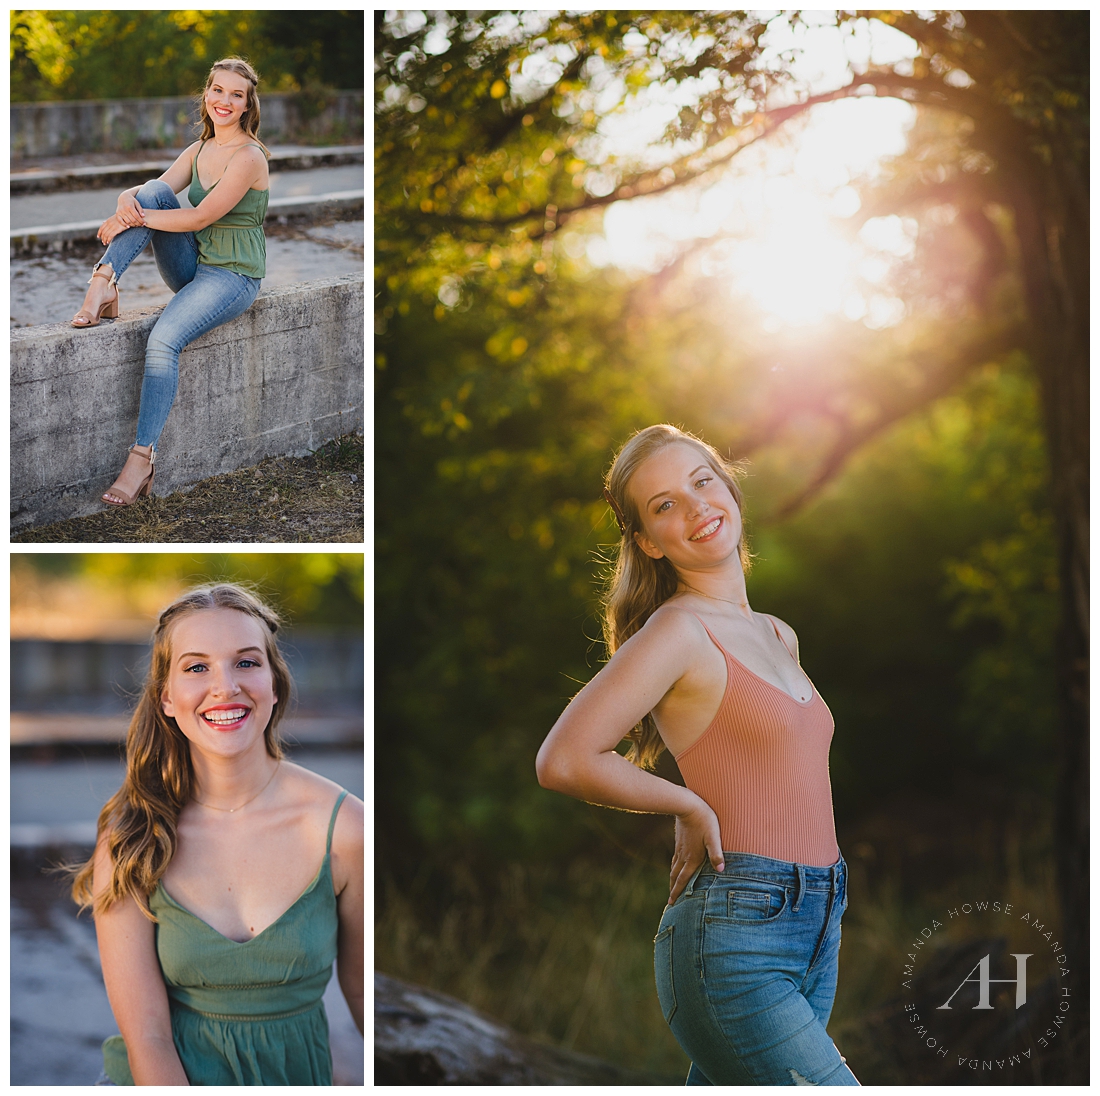 Fort Steilacoom is so versatile for senior portraits! It has the forest, beach, and tall grassy fields. Head to the blog for summer senior portrait inspiration. | Photographed by the Best Tacoma Senior Portrait Photographer Amanda Howse